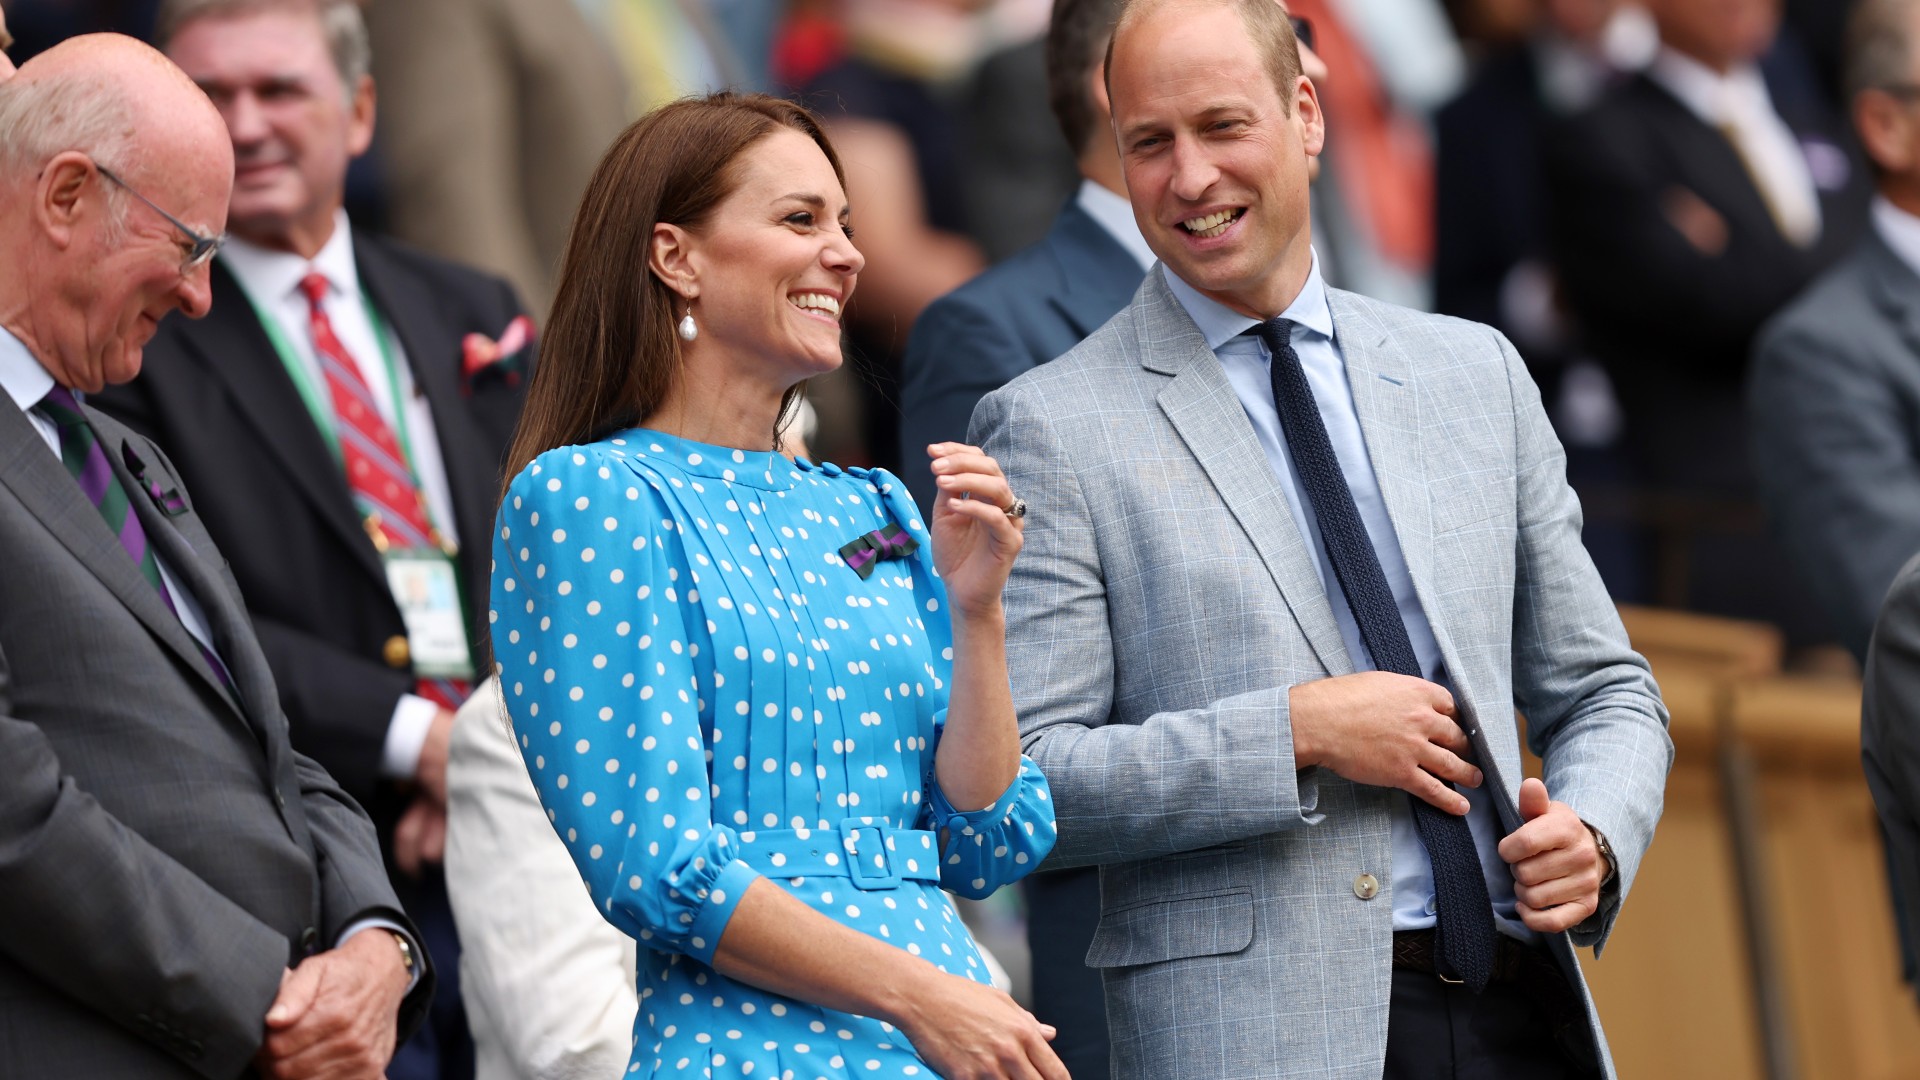 Prince William and Kate Middleton Are as Confident as a Couple as They Are Individually: Body Language Expert